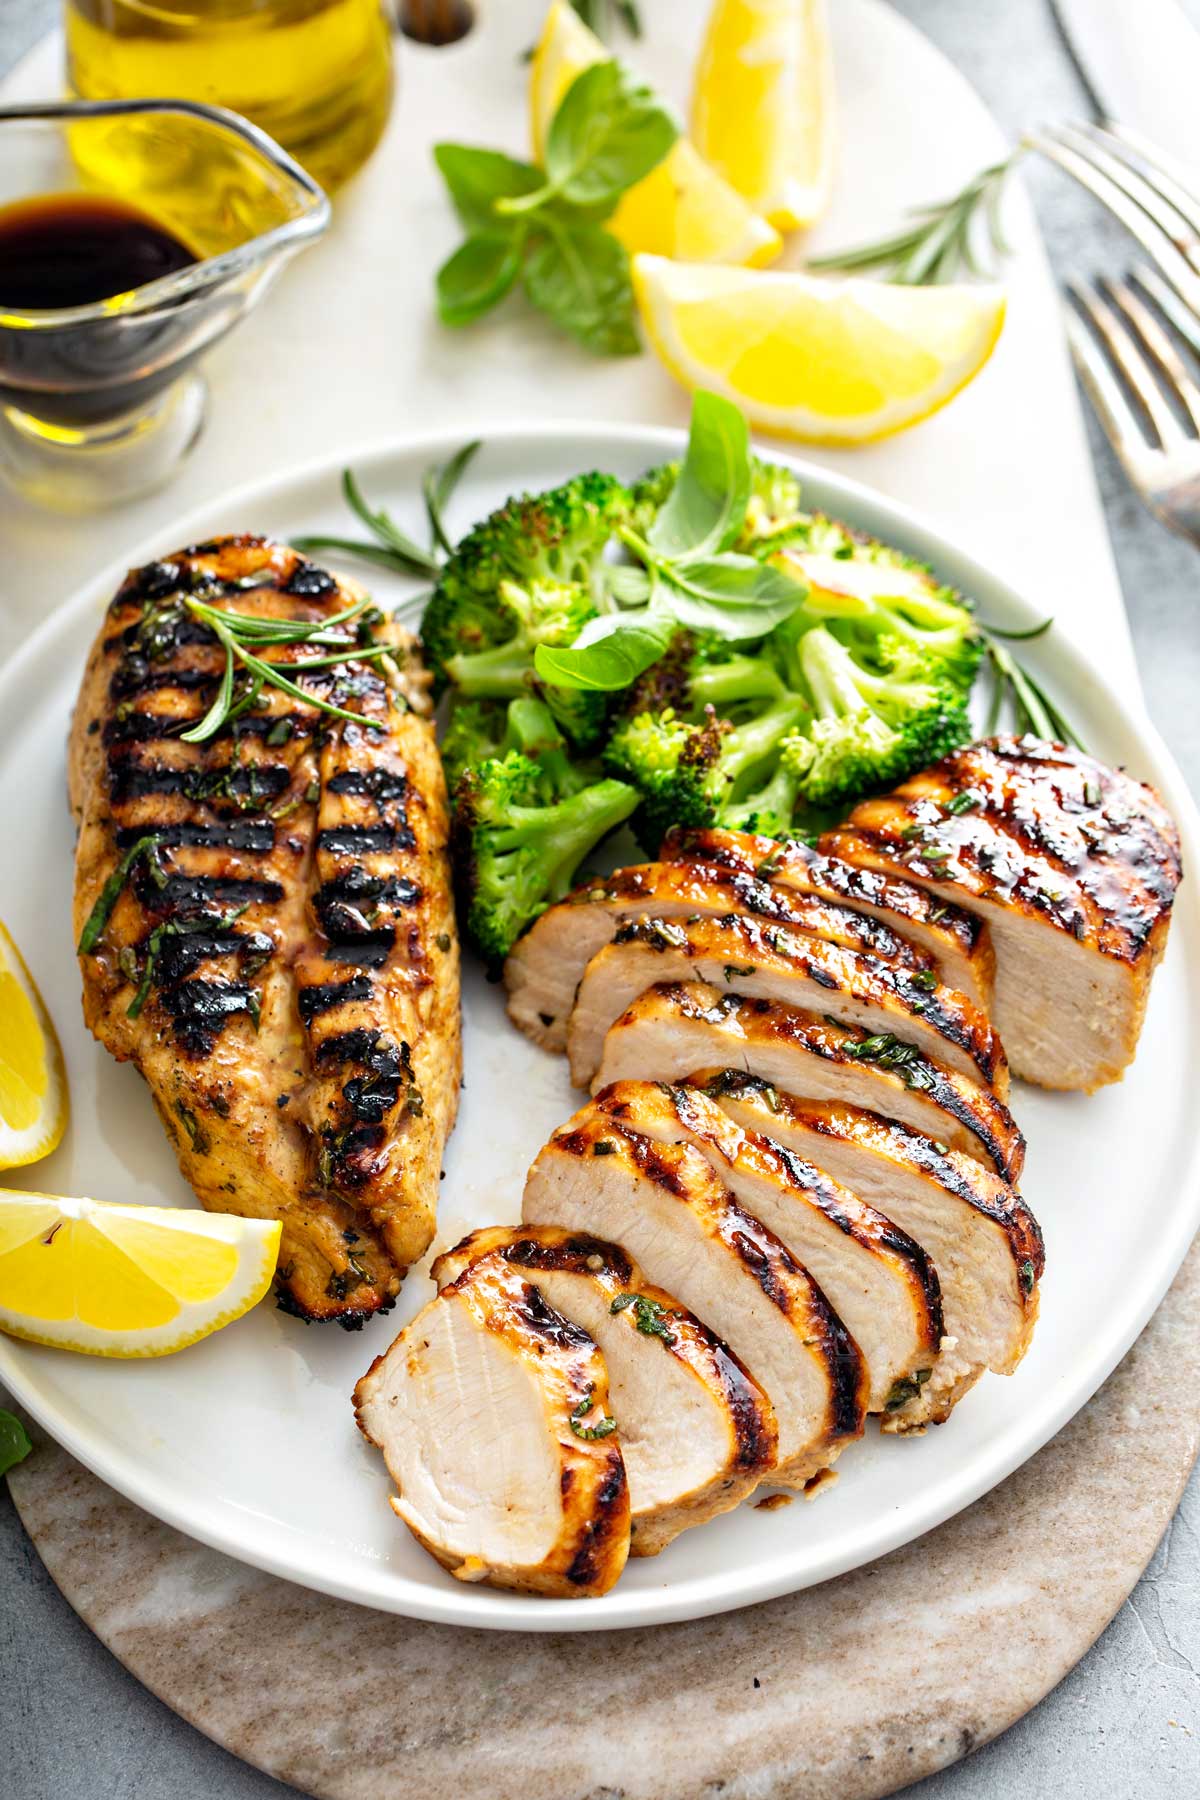 How To Grill Chicken Breast